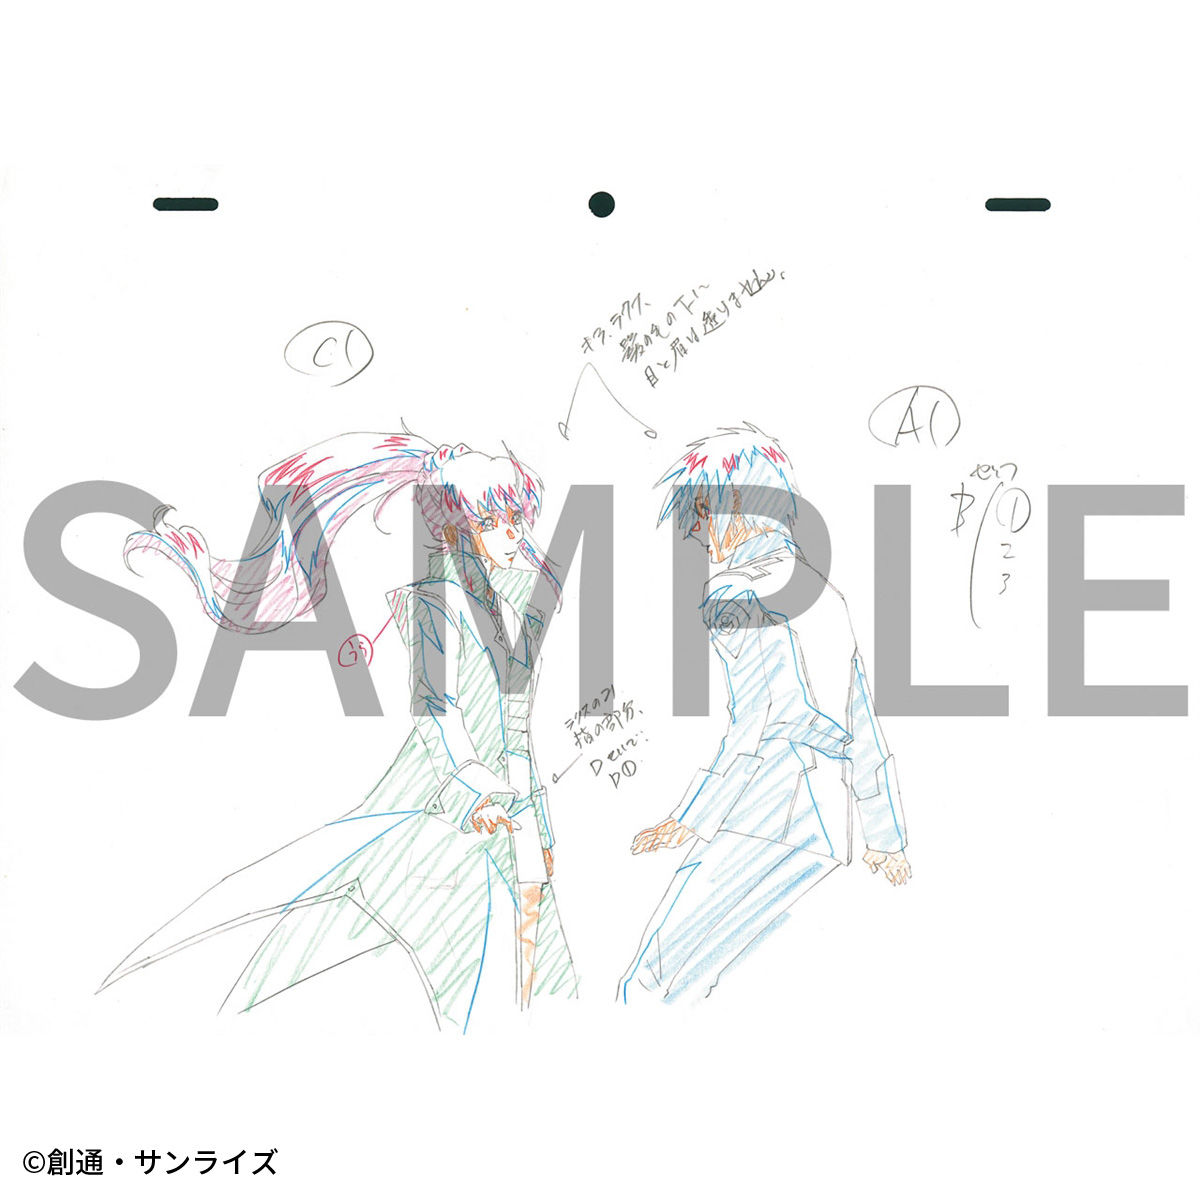 Mobile Suit Gundam Seed HD Remaster New Cut Illustrations Phase Two ~Hisashi Hirai Commemorative Drawing Cover~